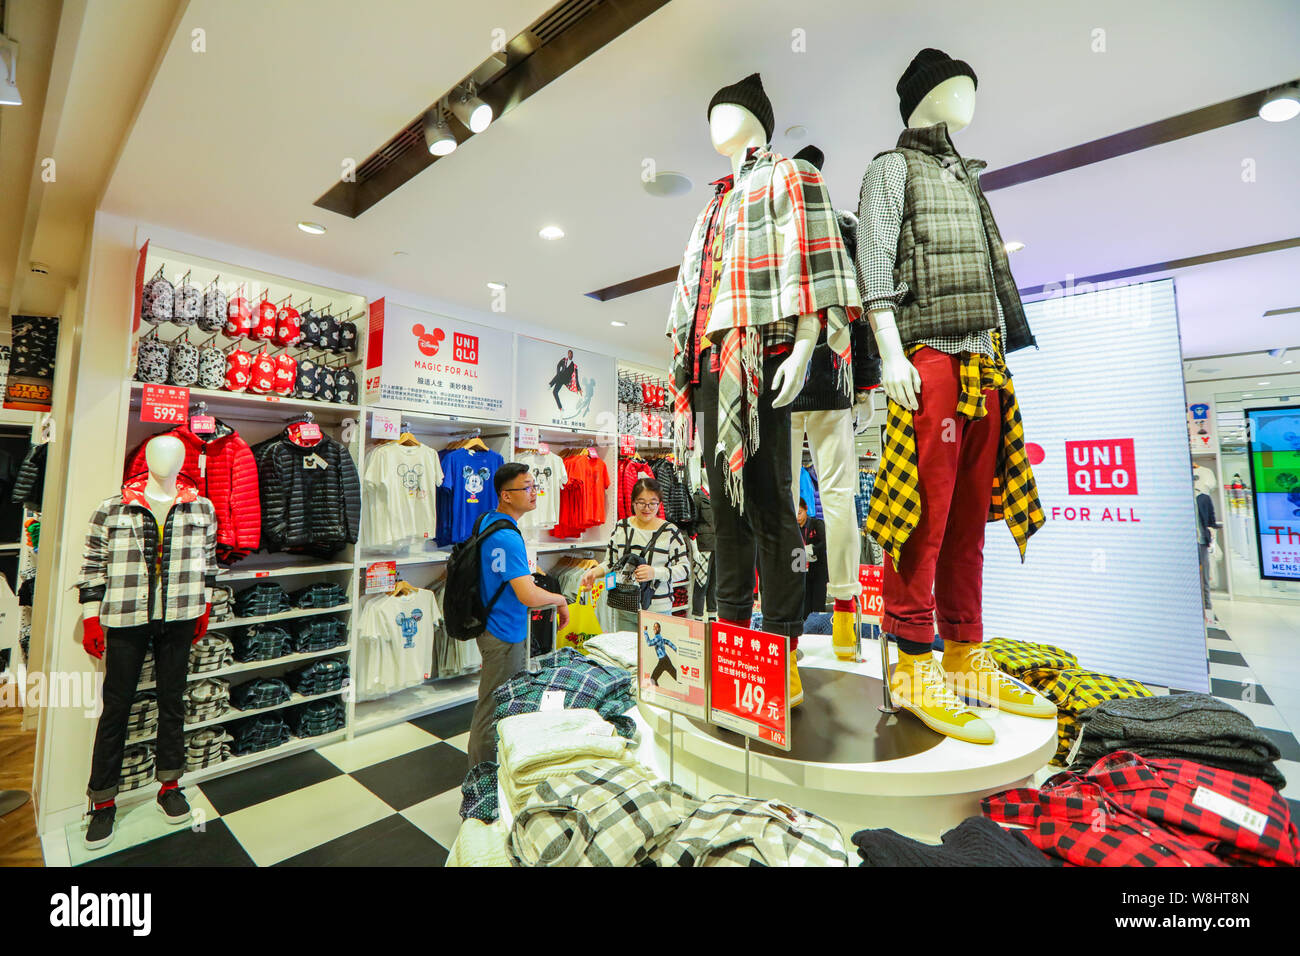 Customers Shop For T Shirts And Jackets Of Magic For All Series At The Uniqlo S Disney Inspired Concept Store In Shanghai China 29 September 15 Stock Photo Alamy